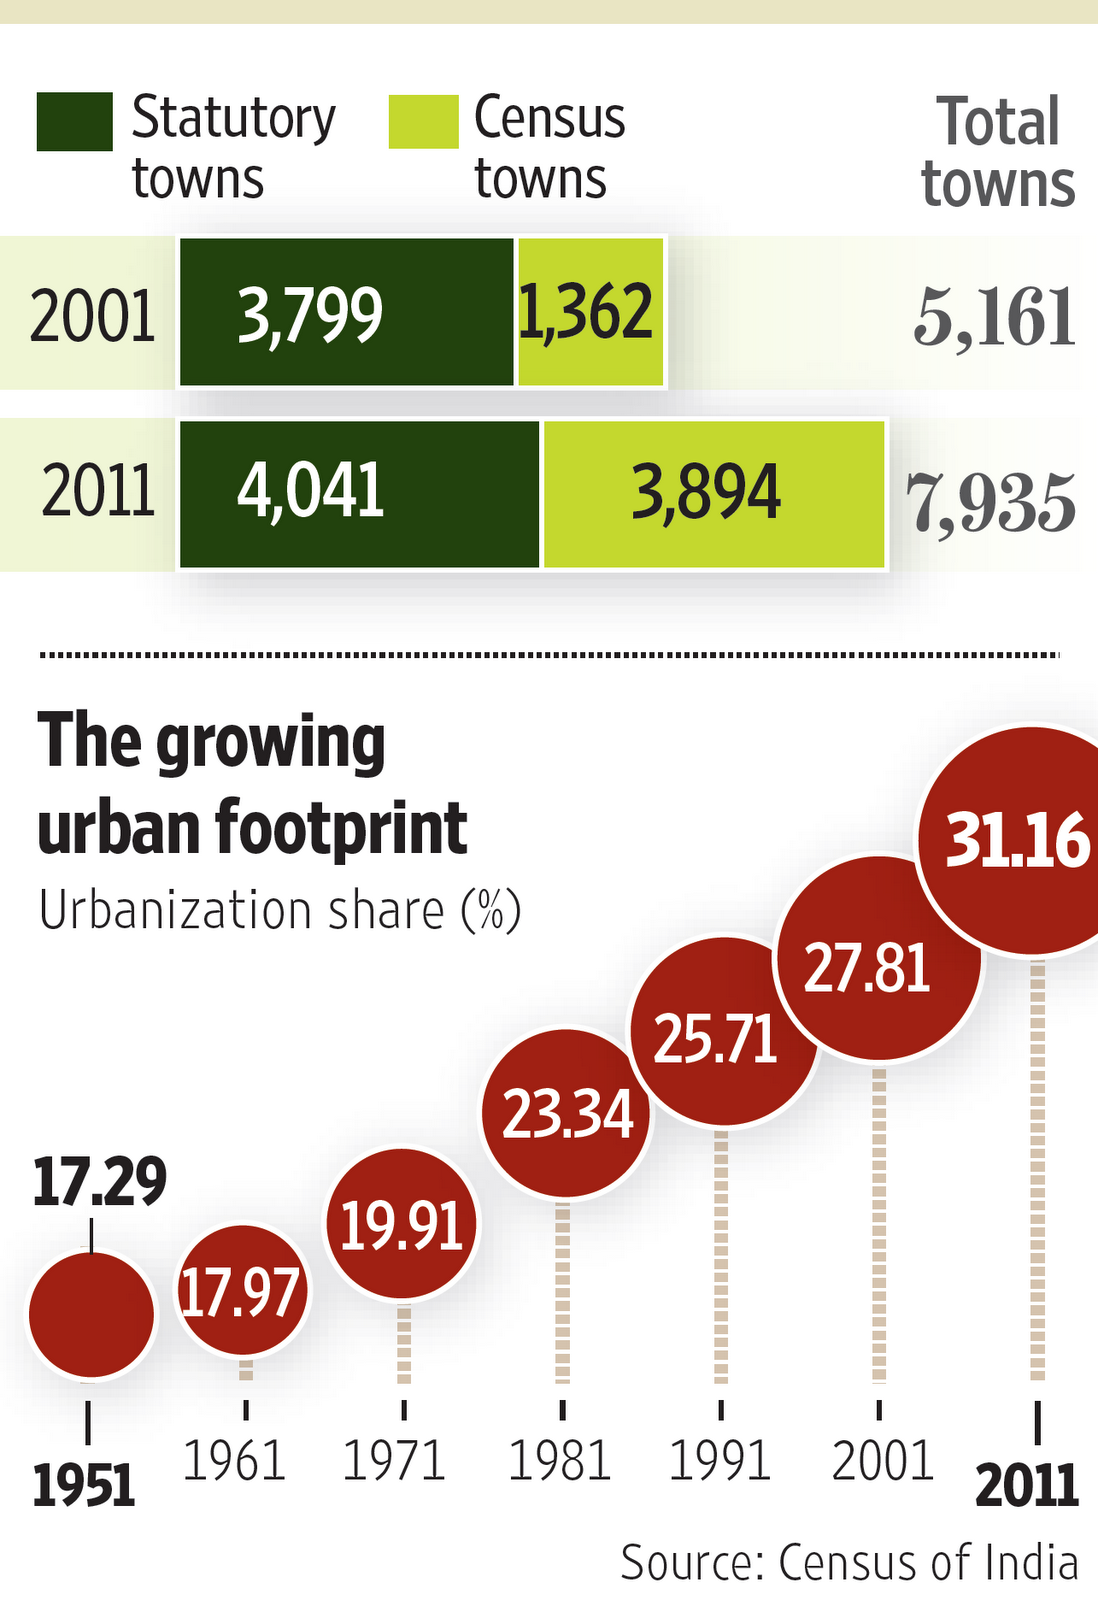 Urbanization in India and its growth